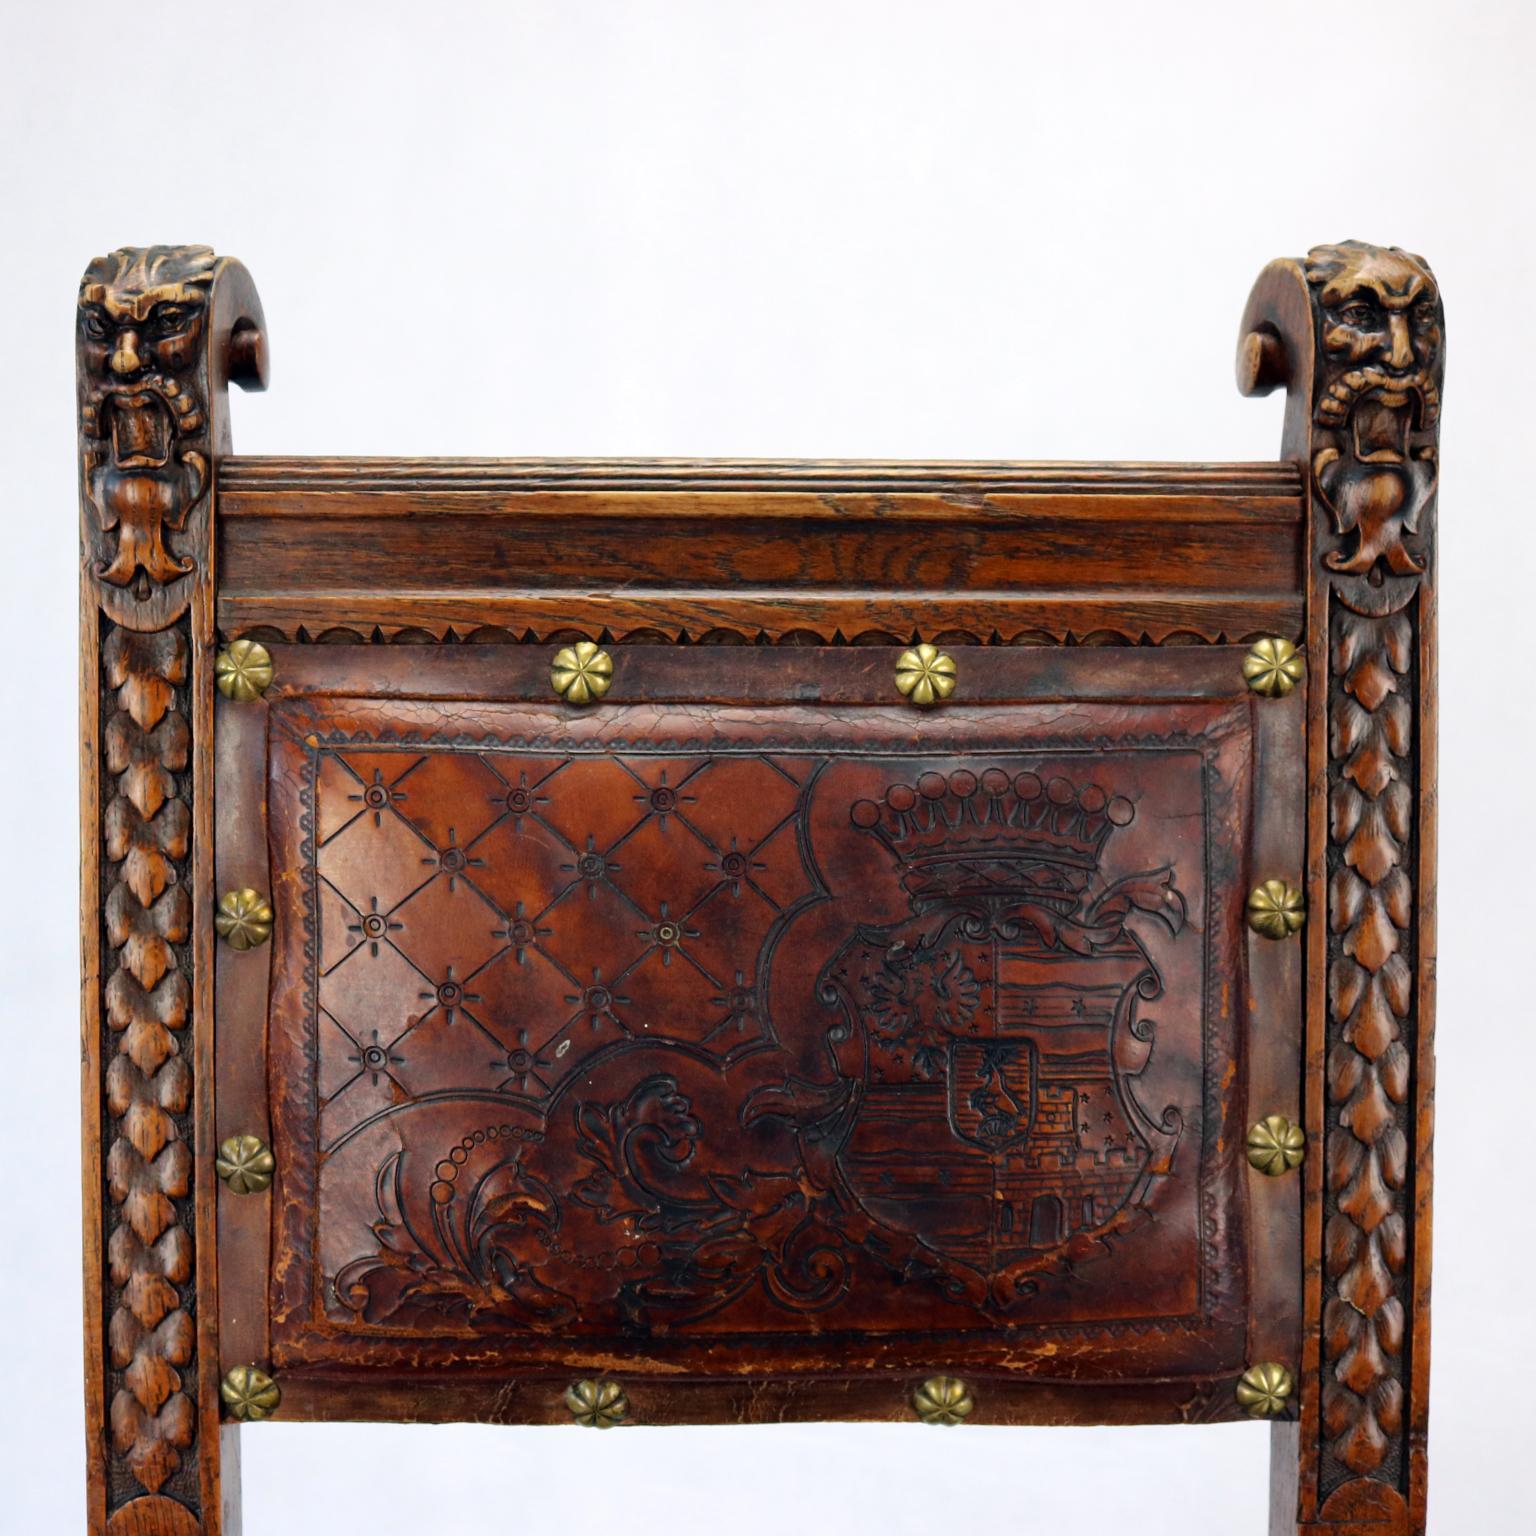 Reanaissance Revival Hand-Carved Chair with Embossed Leather 19th Century For Sale 7